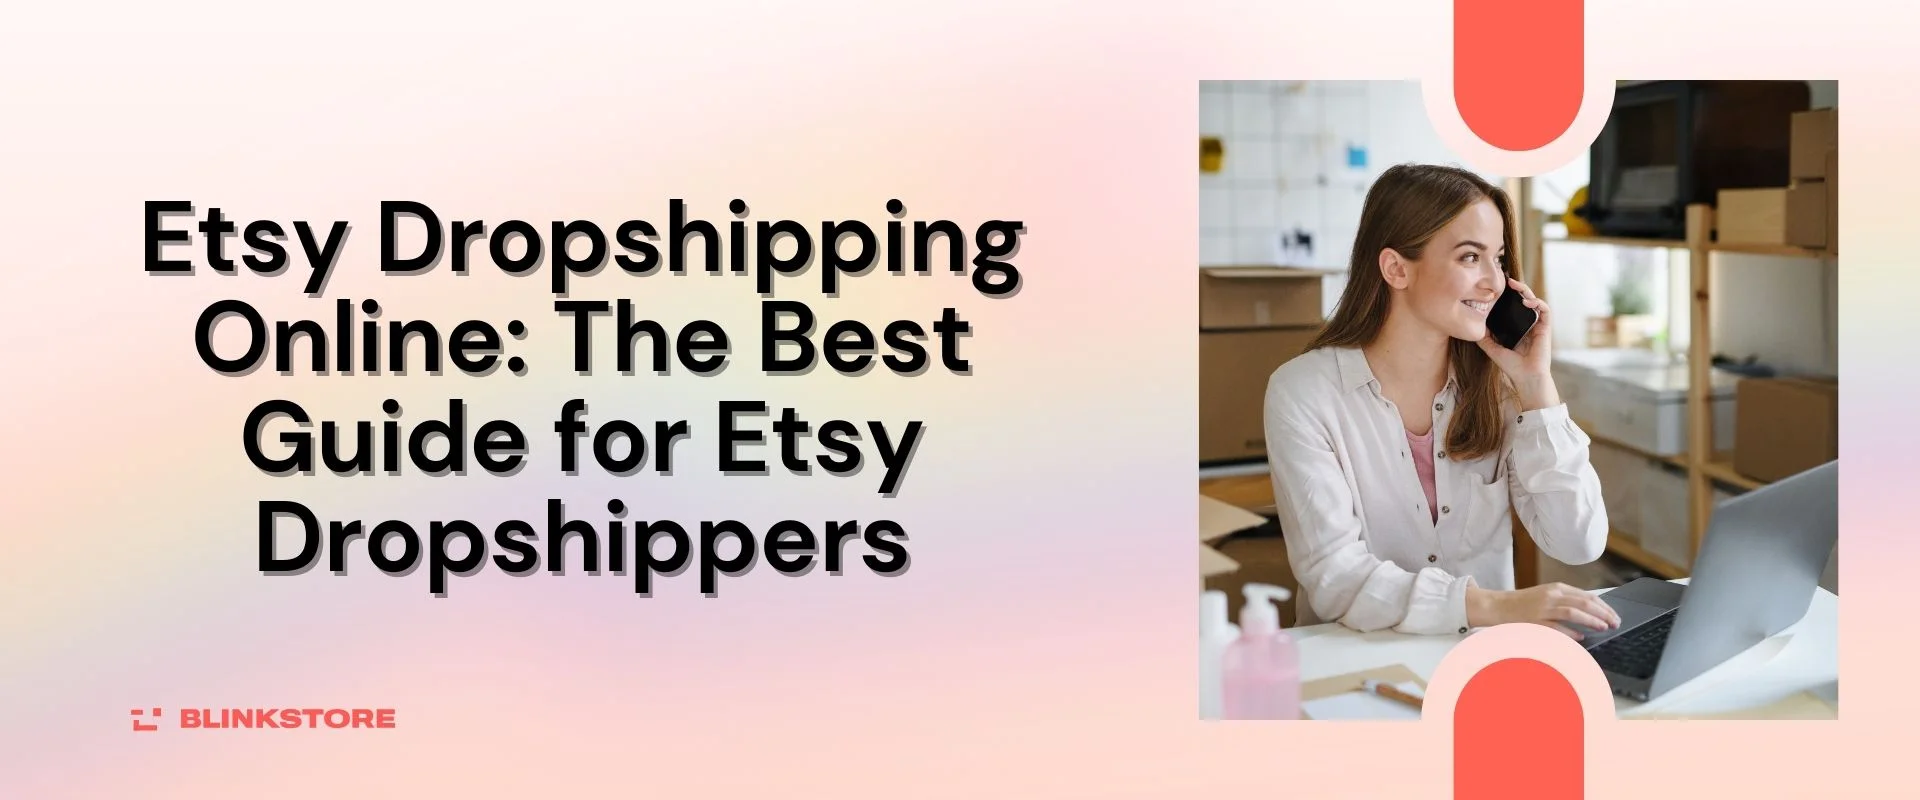 Etsy Dropshipping Online: The Best Guide for Etsy Dropshippers